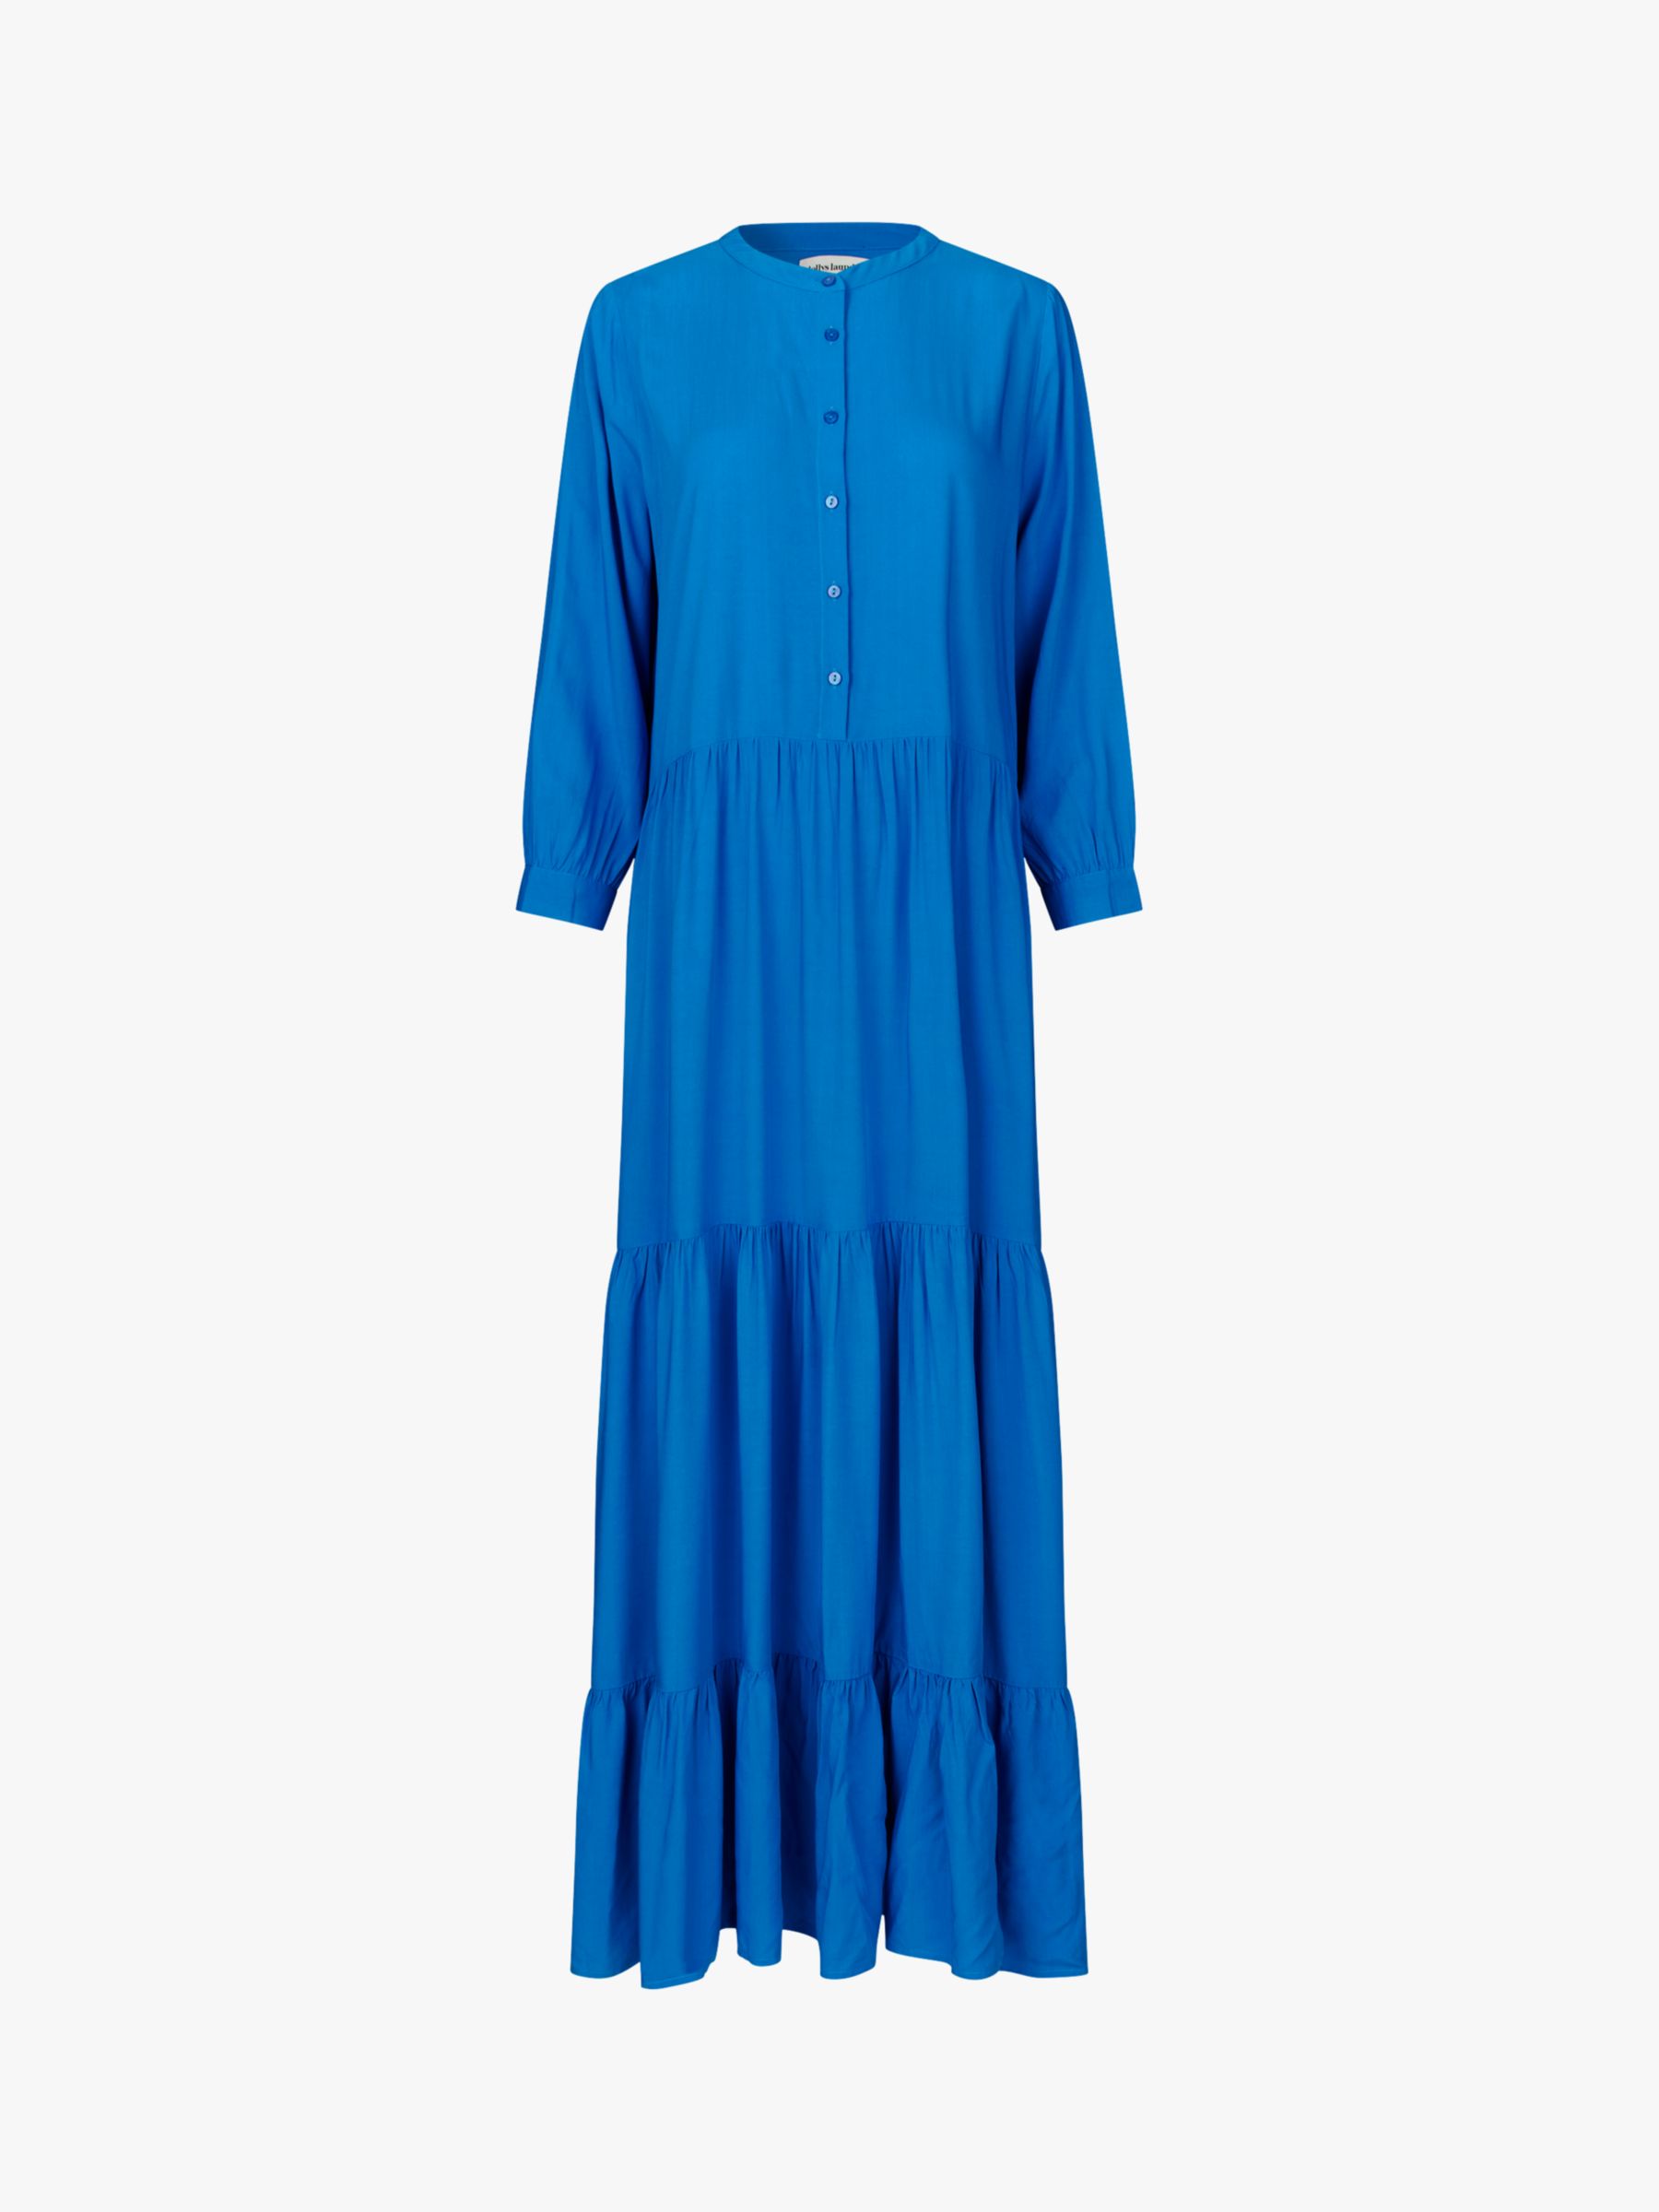 Buy Lollys Laundry Nee Tiered Maxi Dress, Cobalt Online at johnlewis.com